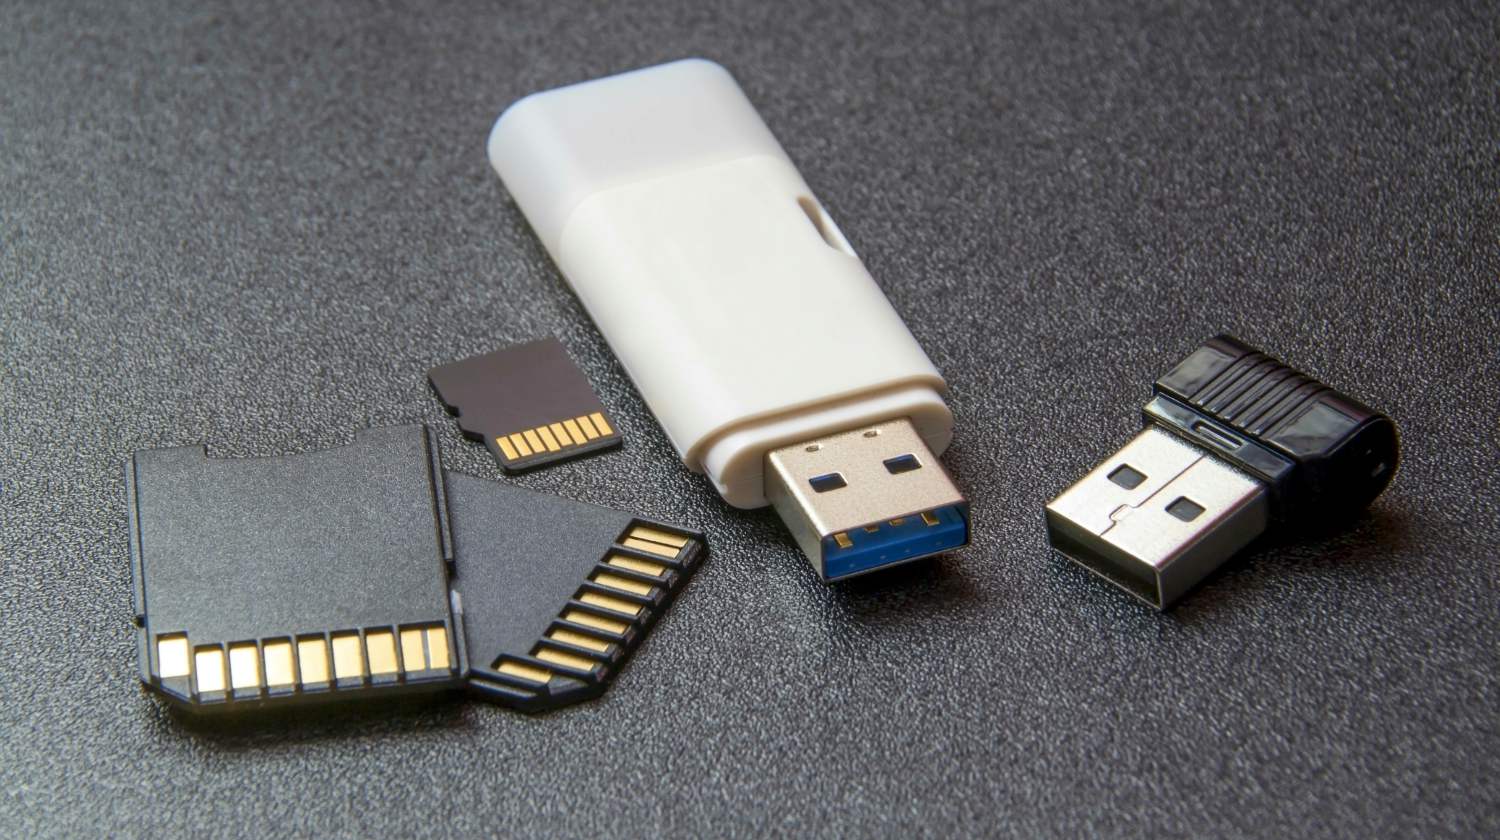 How USB Flash Drives Has Changed The World And Made Life Easy?